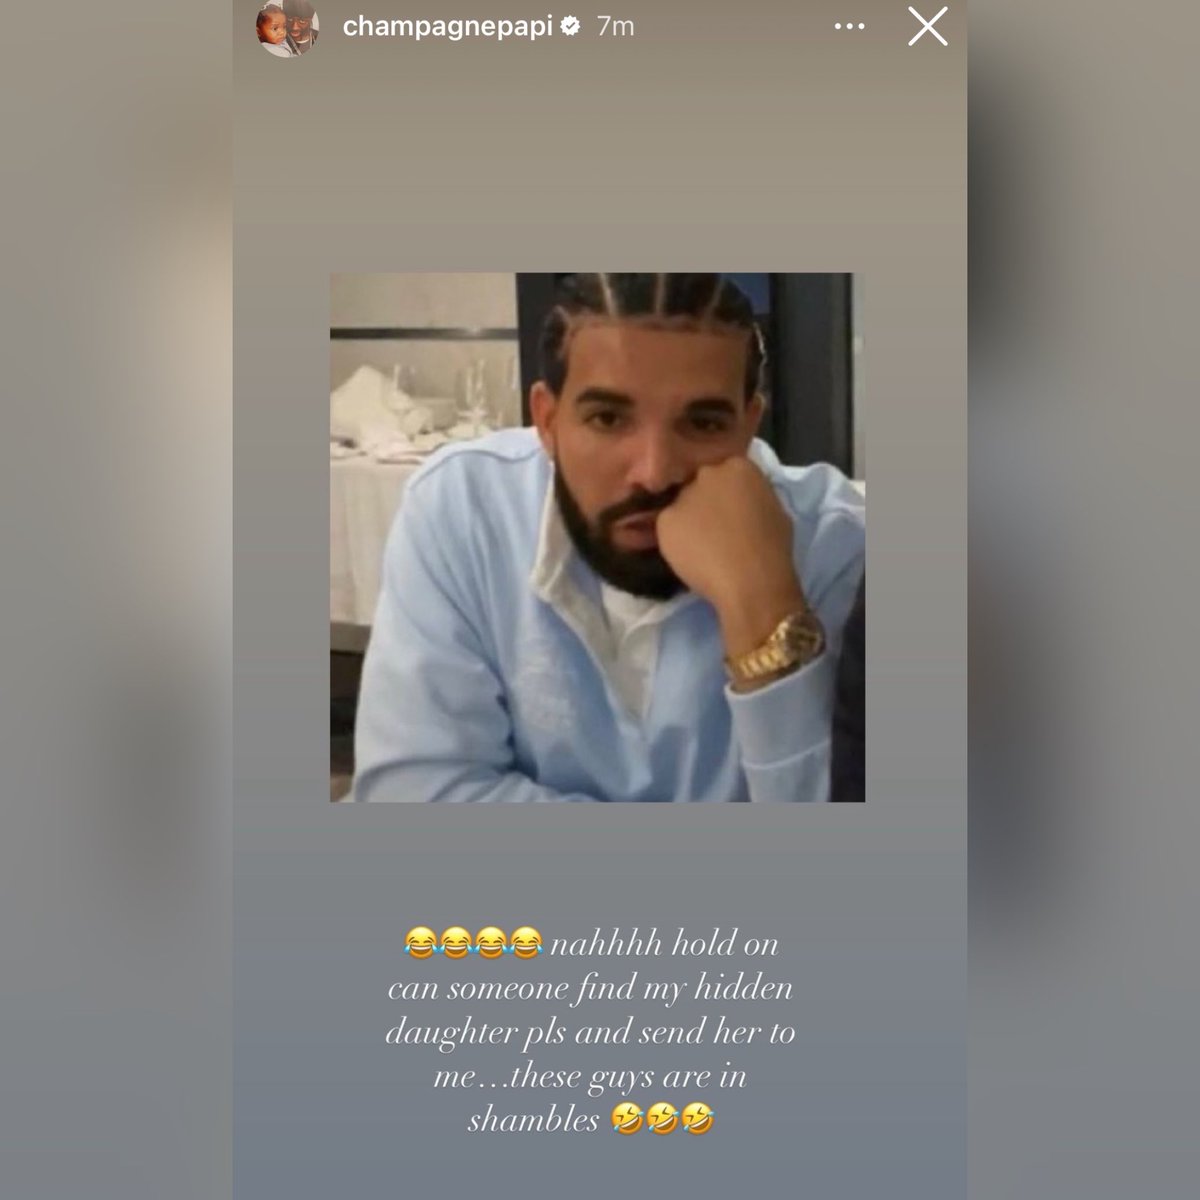 Drake reacts to Kendrick claiming he is hiding a daughter